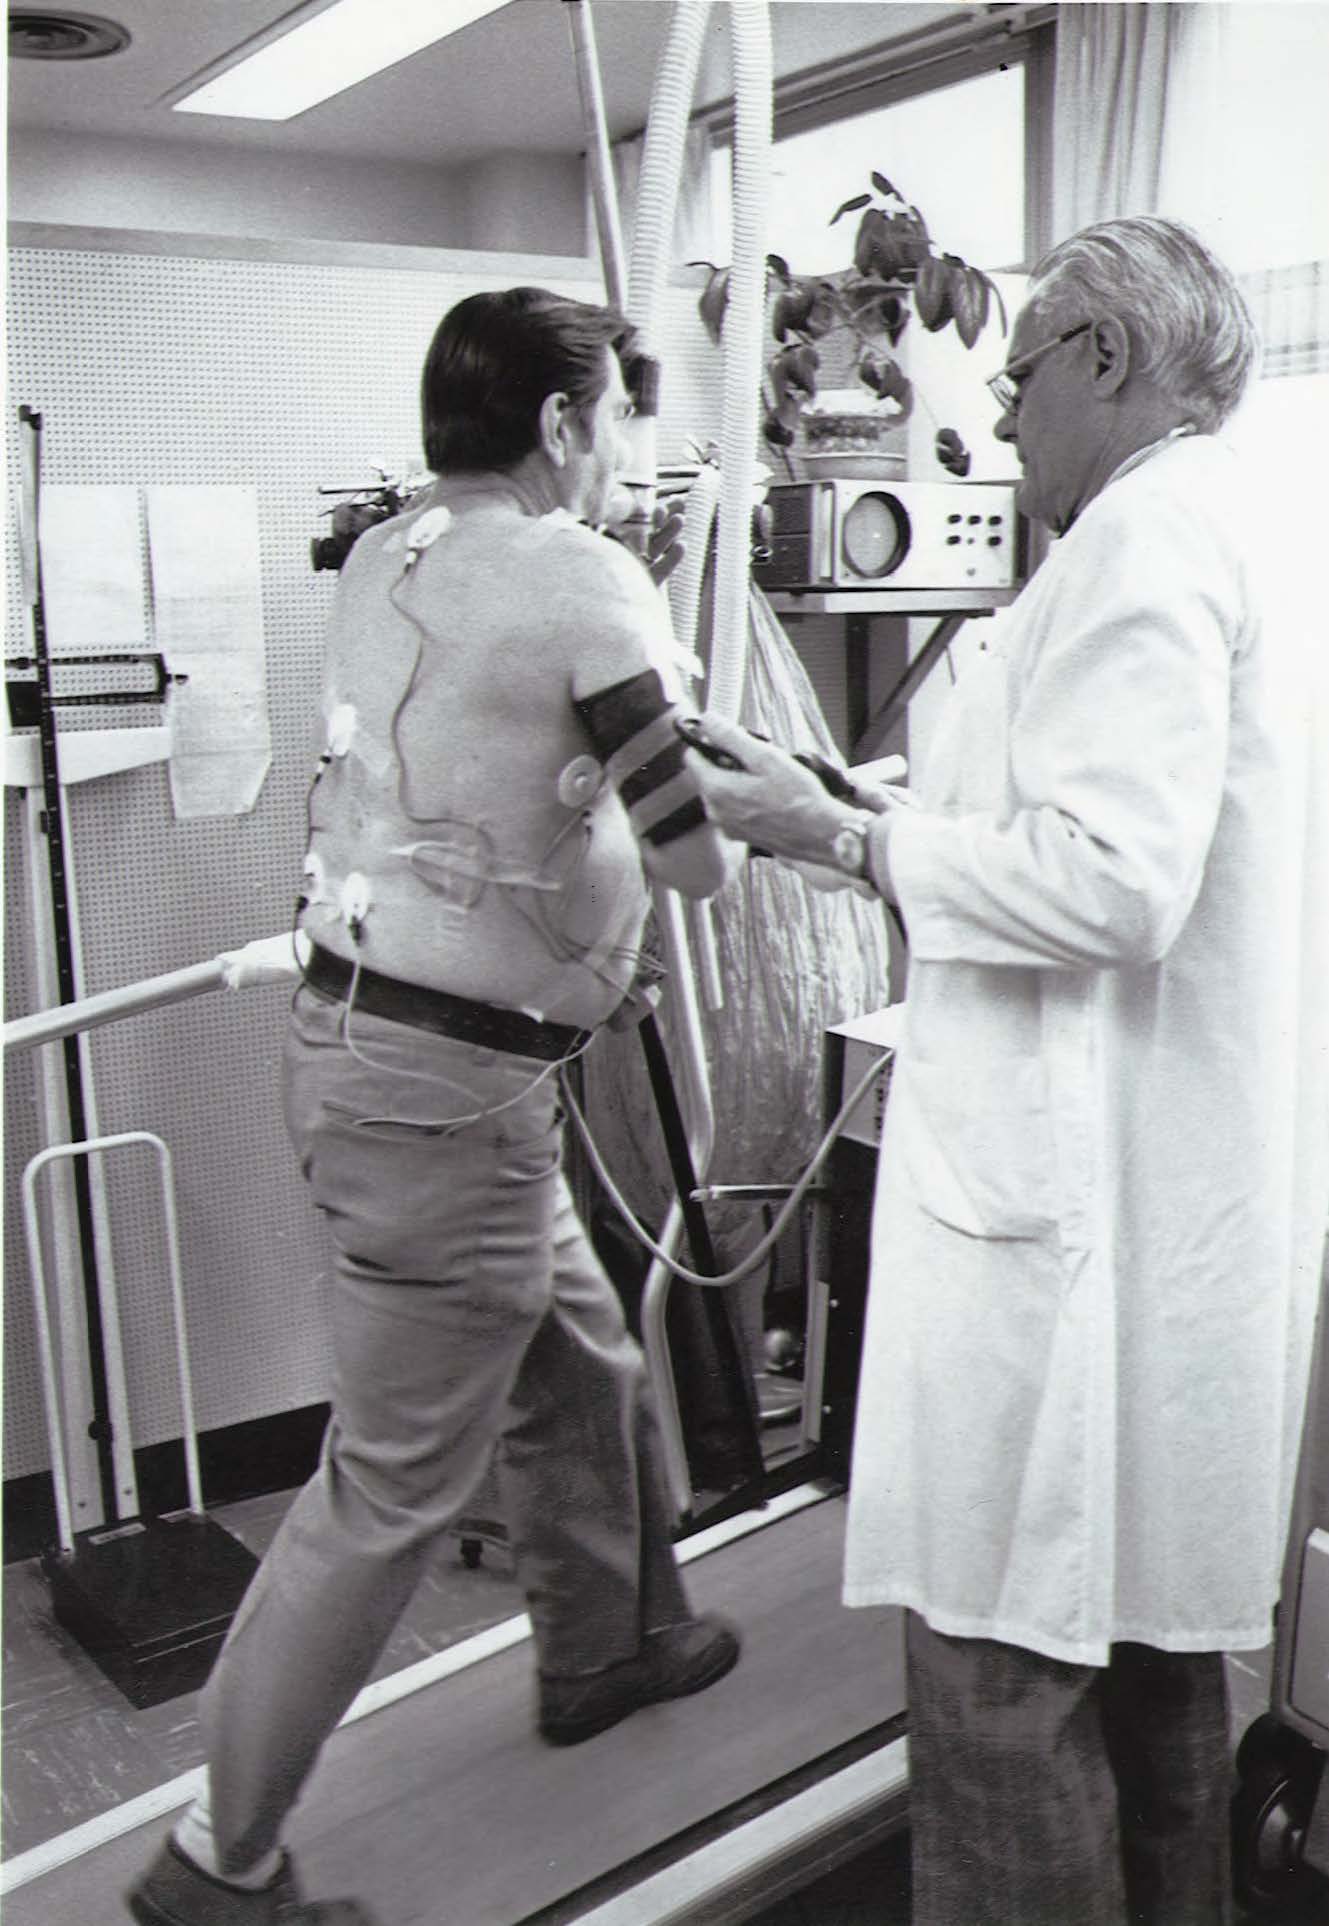 Dr. Robert Bruce with patient on treadmill